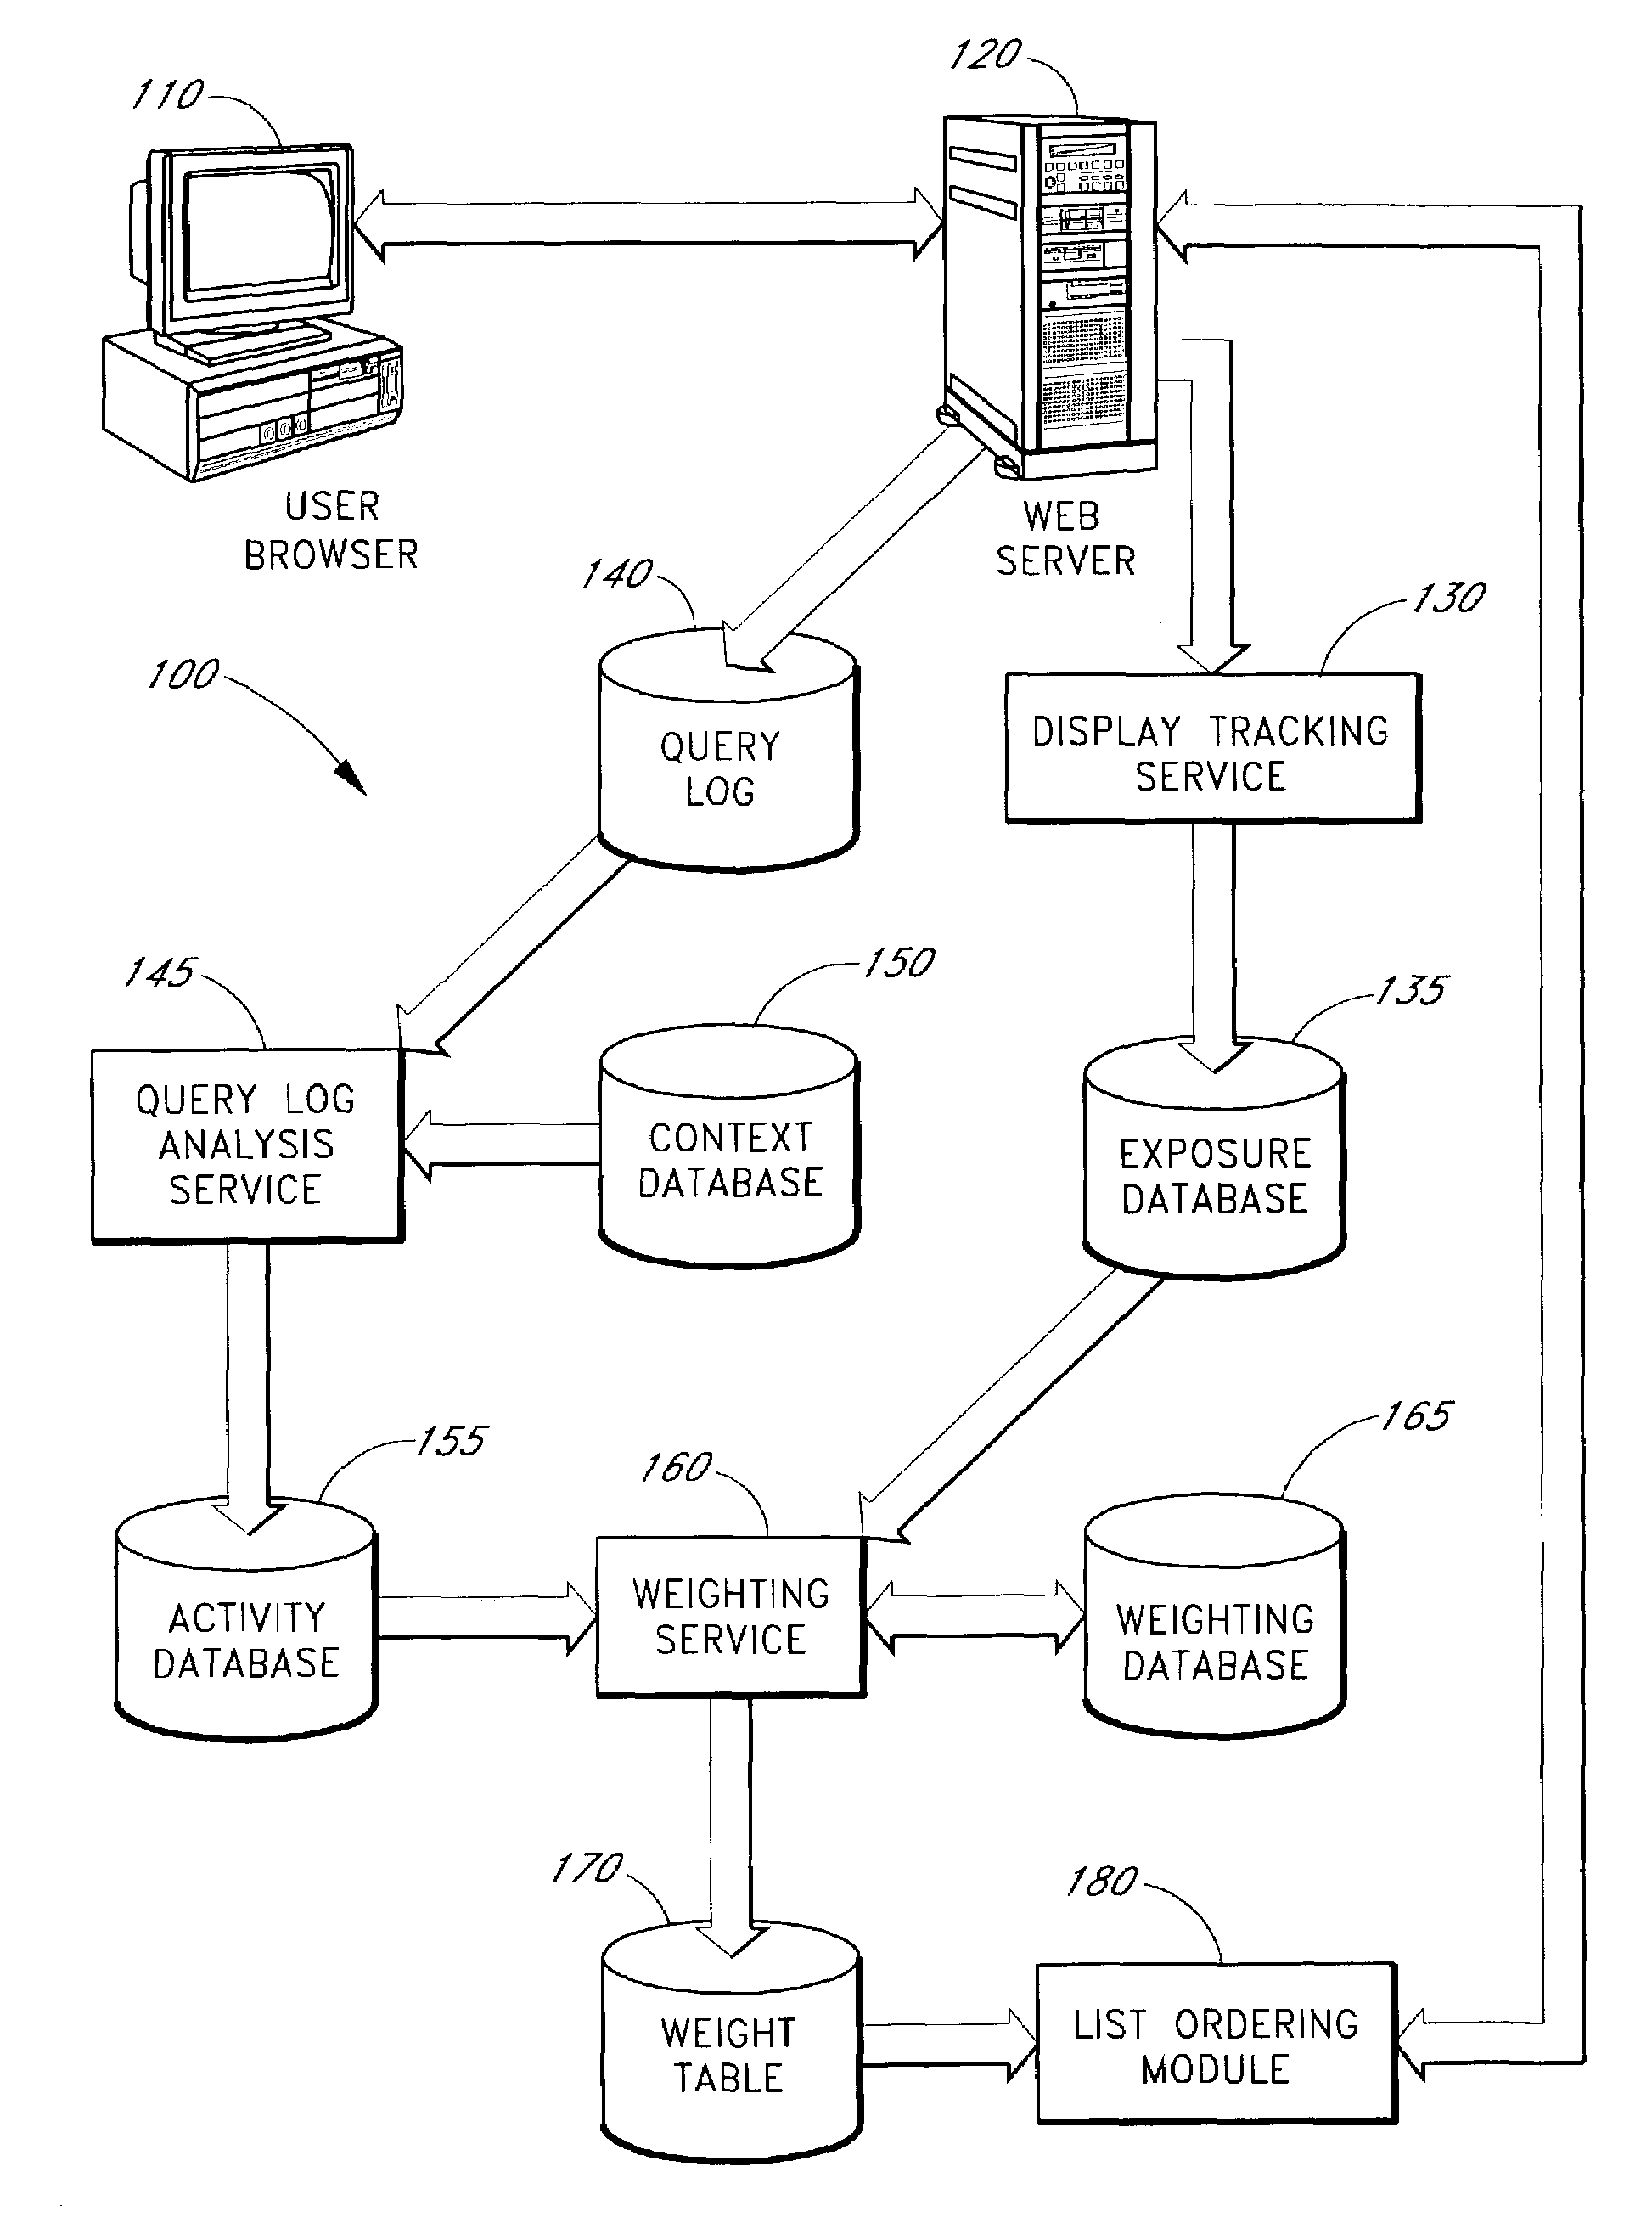 Computer processes and systems for adaptively controlling the display of items